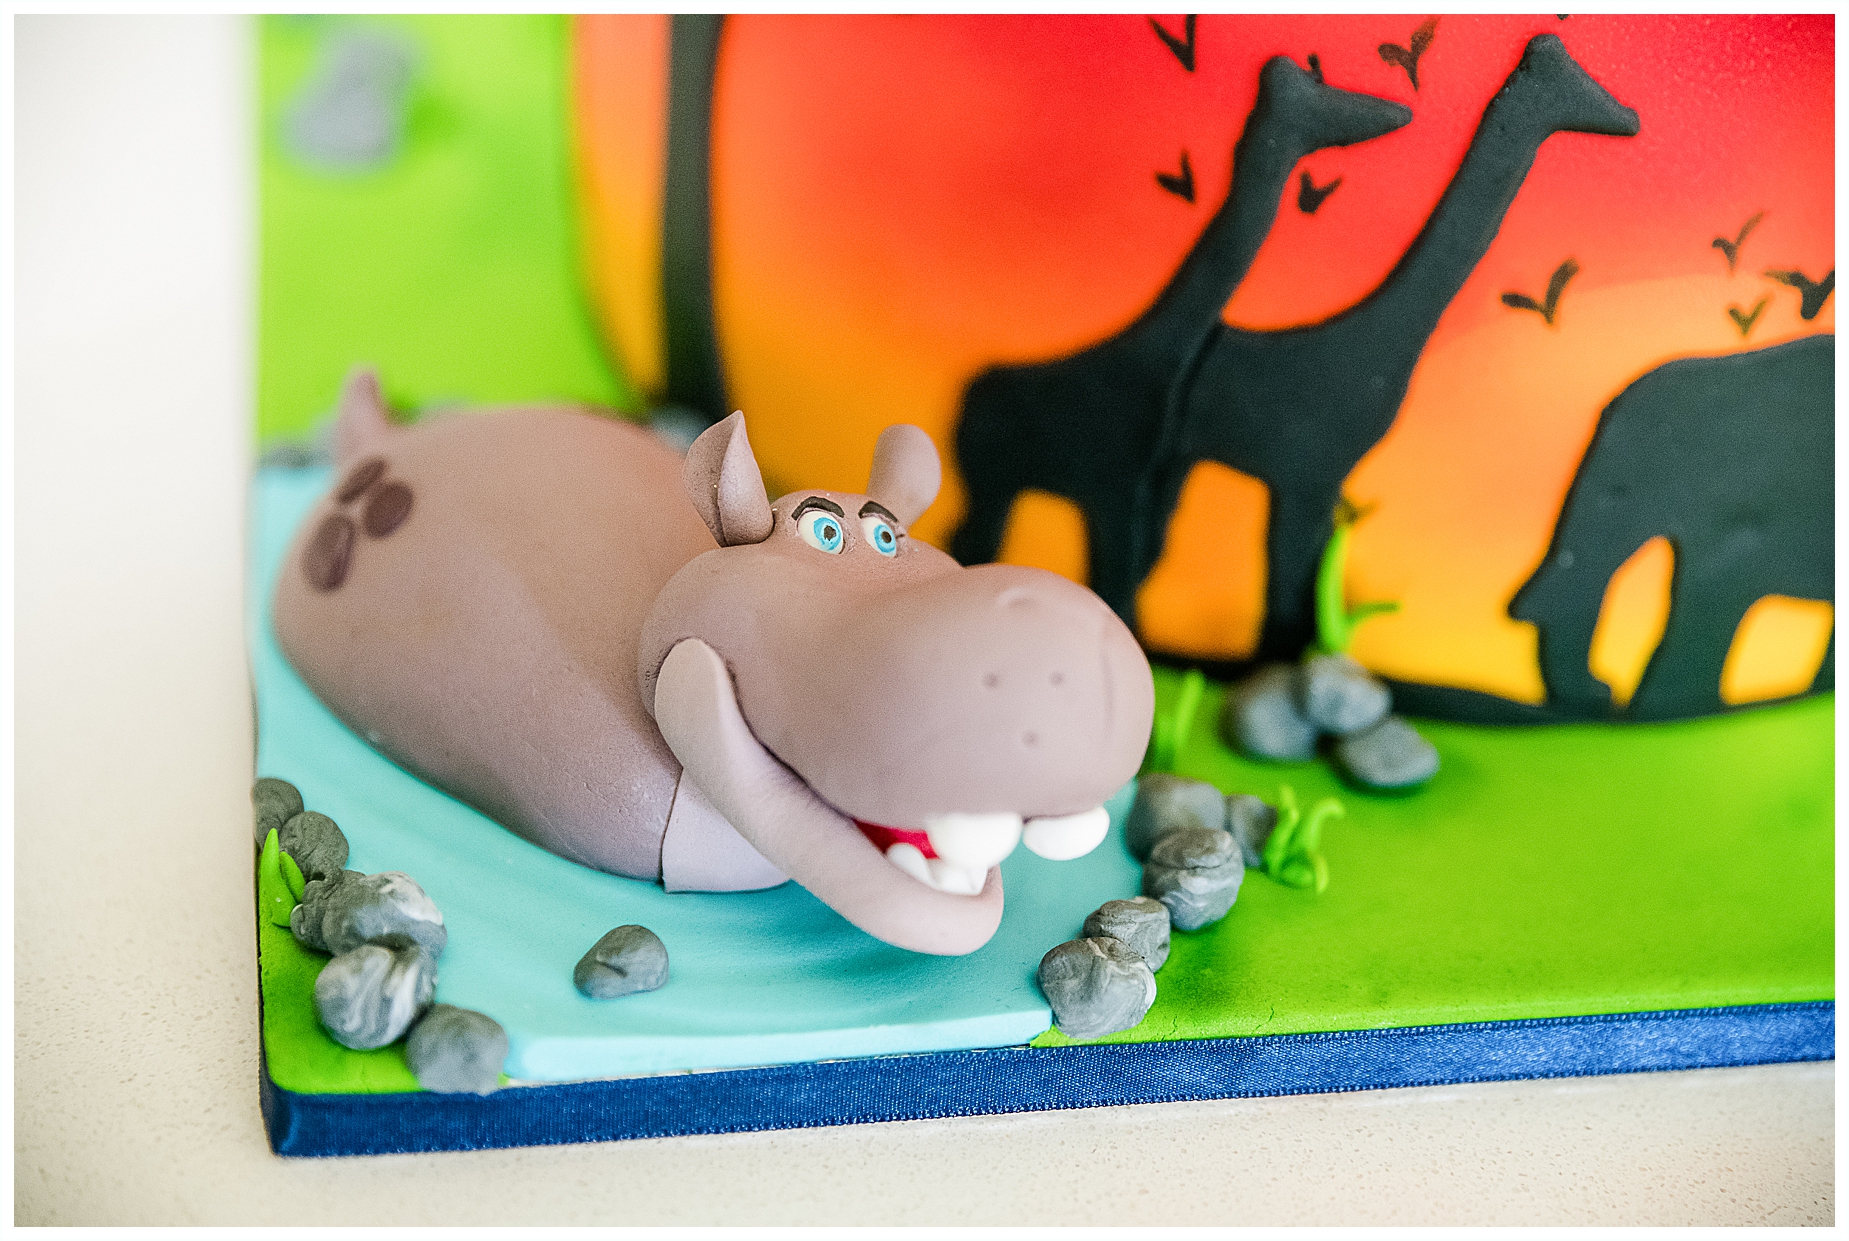 Lion King Cake toppers